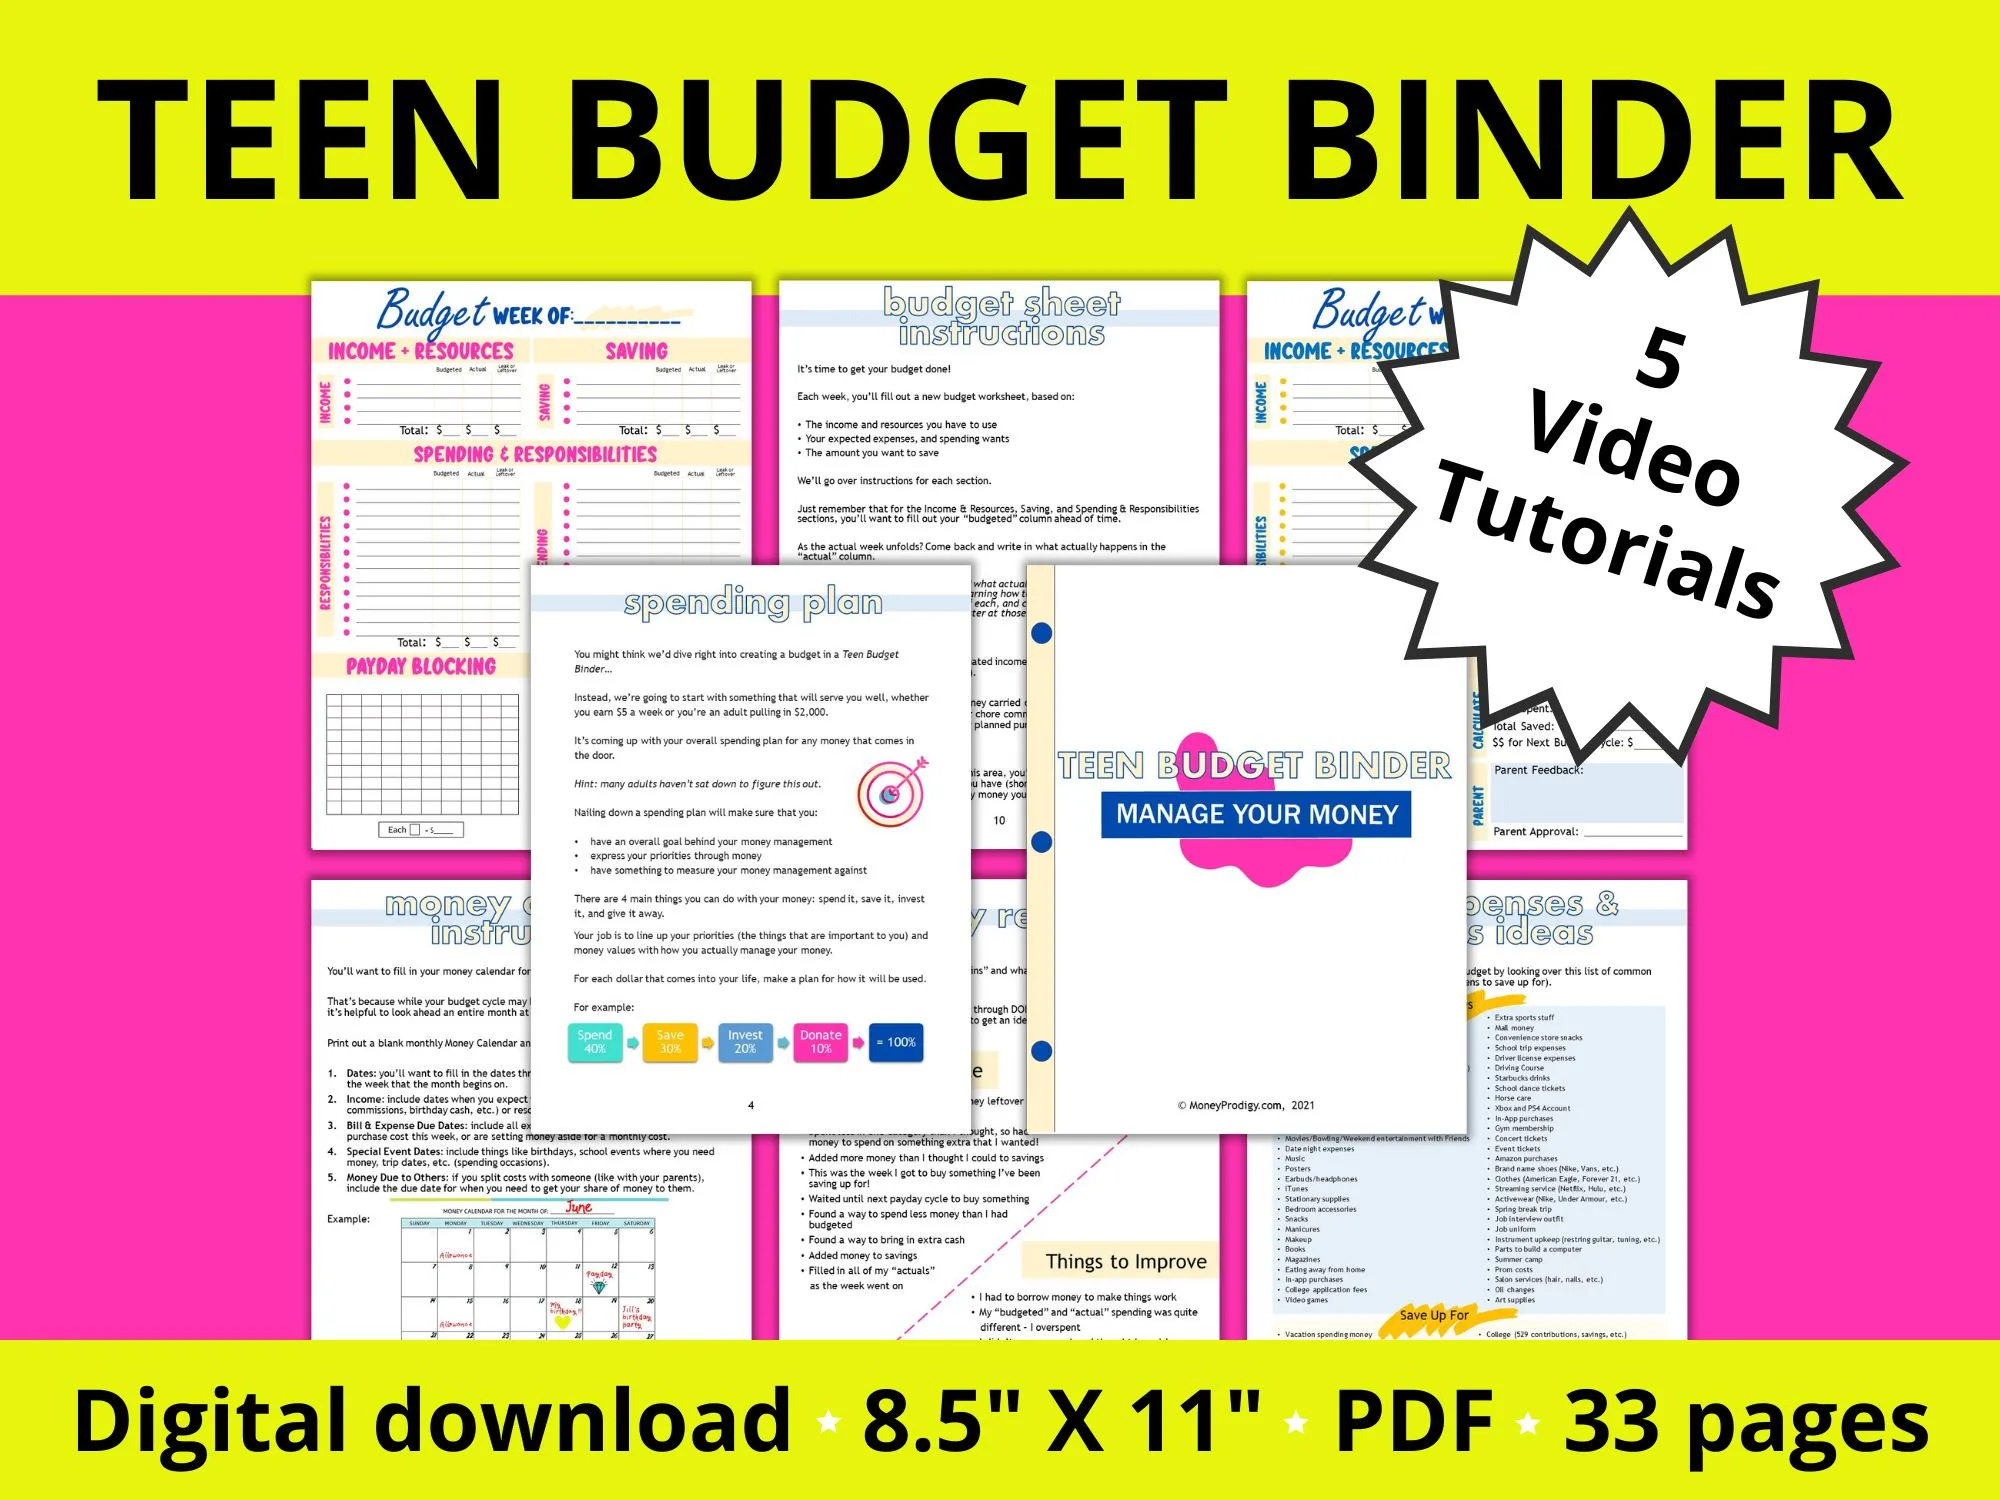 hot pink and neon green background with Teen Budget Binder pages printed out around it